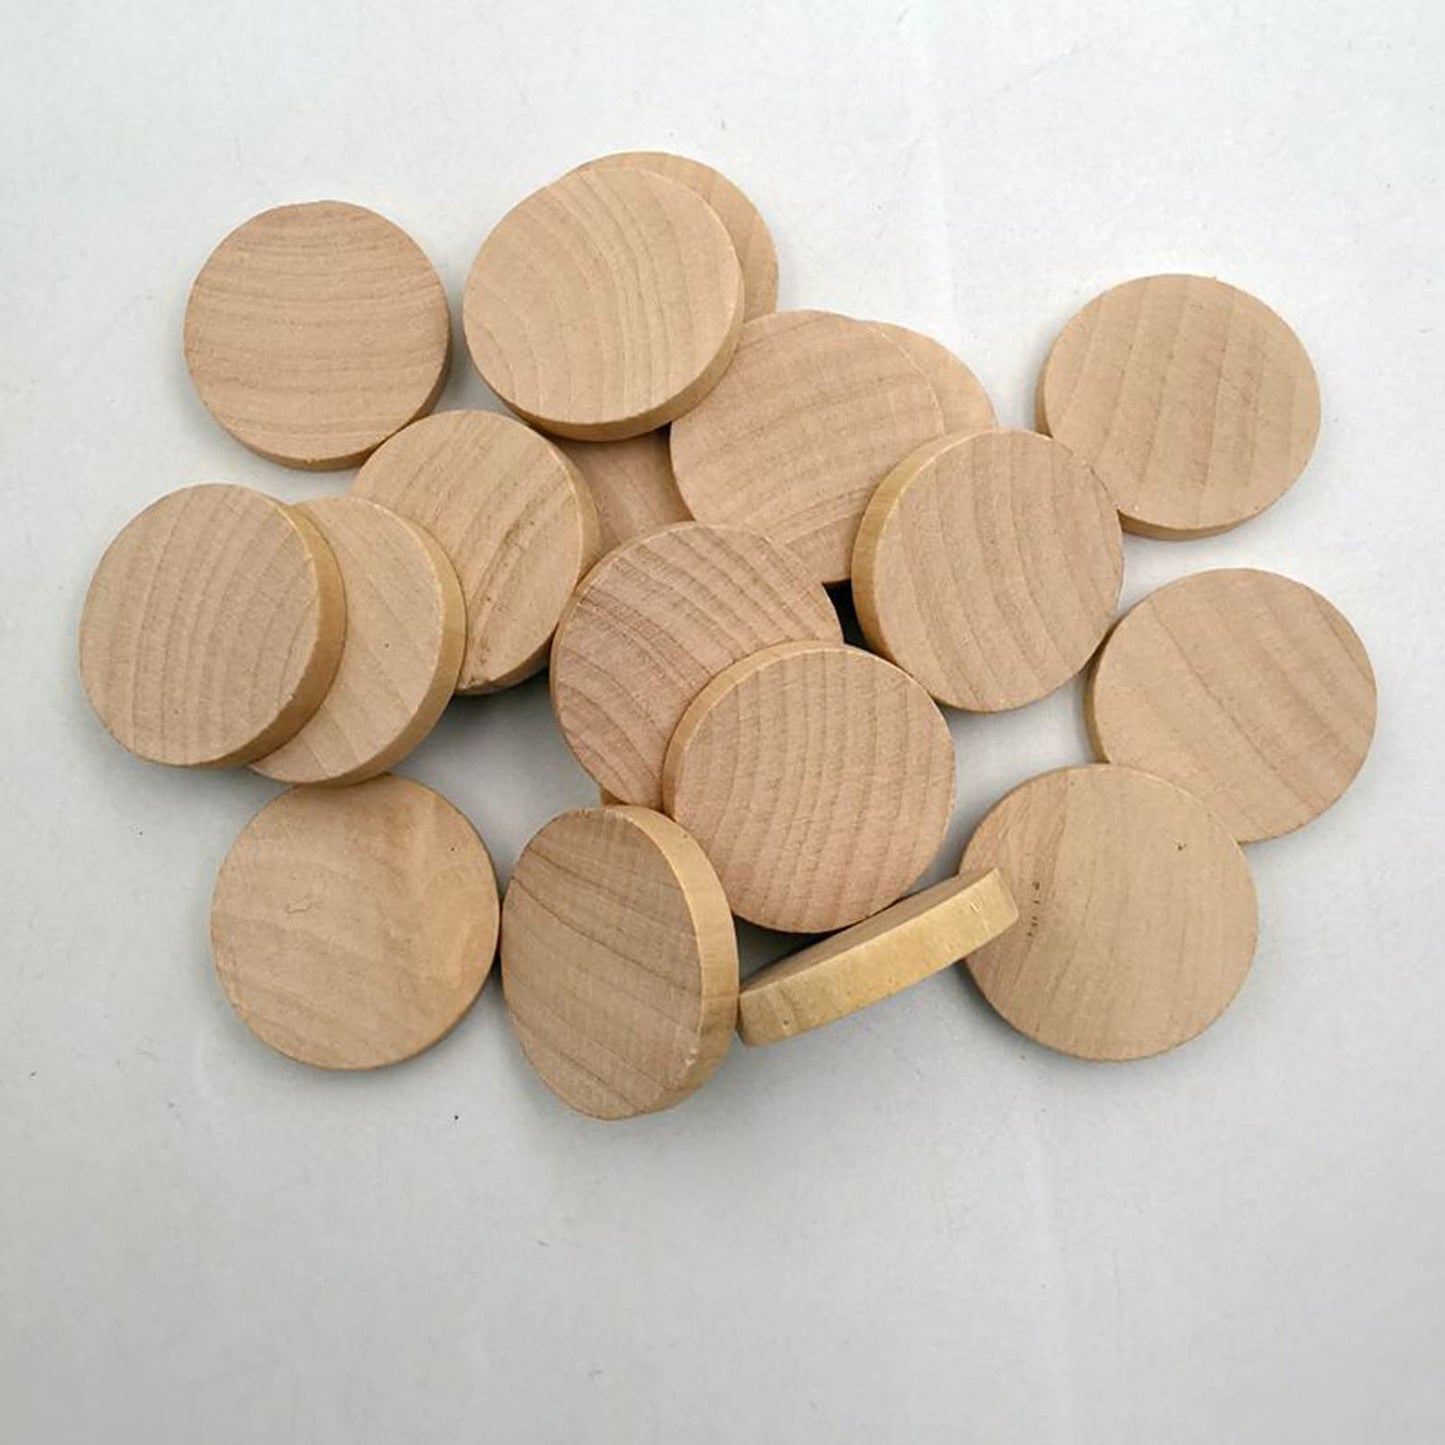 50 Pcs 1 Inch Natural Wood Slices Unfinished Round Wood Coins,Round Wooden Discs Circles,Natural Unfinished Wood Plaque for DIY Arts & Crafts